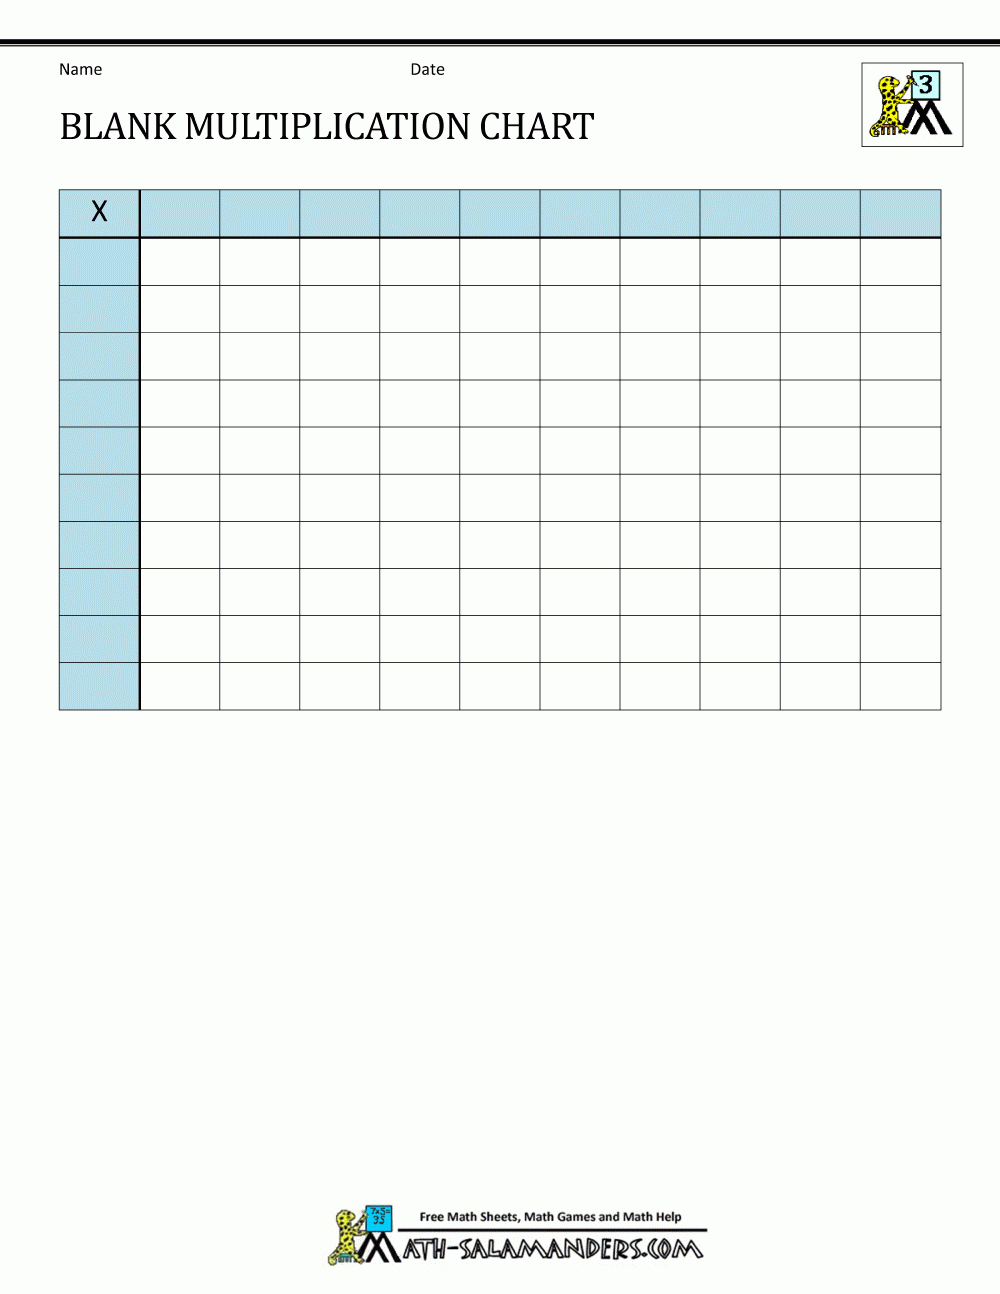 Blank Multiplication Chart Up To 10X10 within Printable 10X10 Multiplication Chart